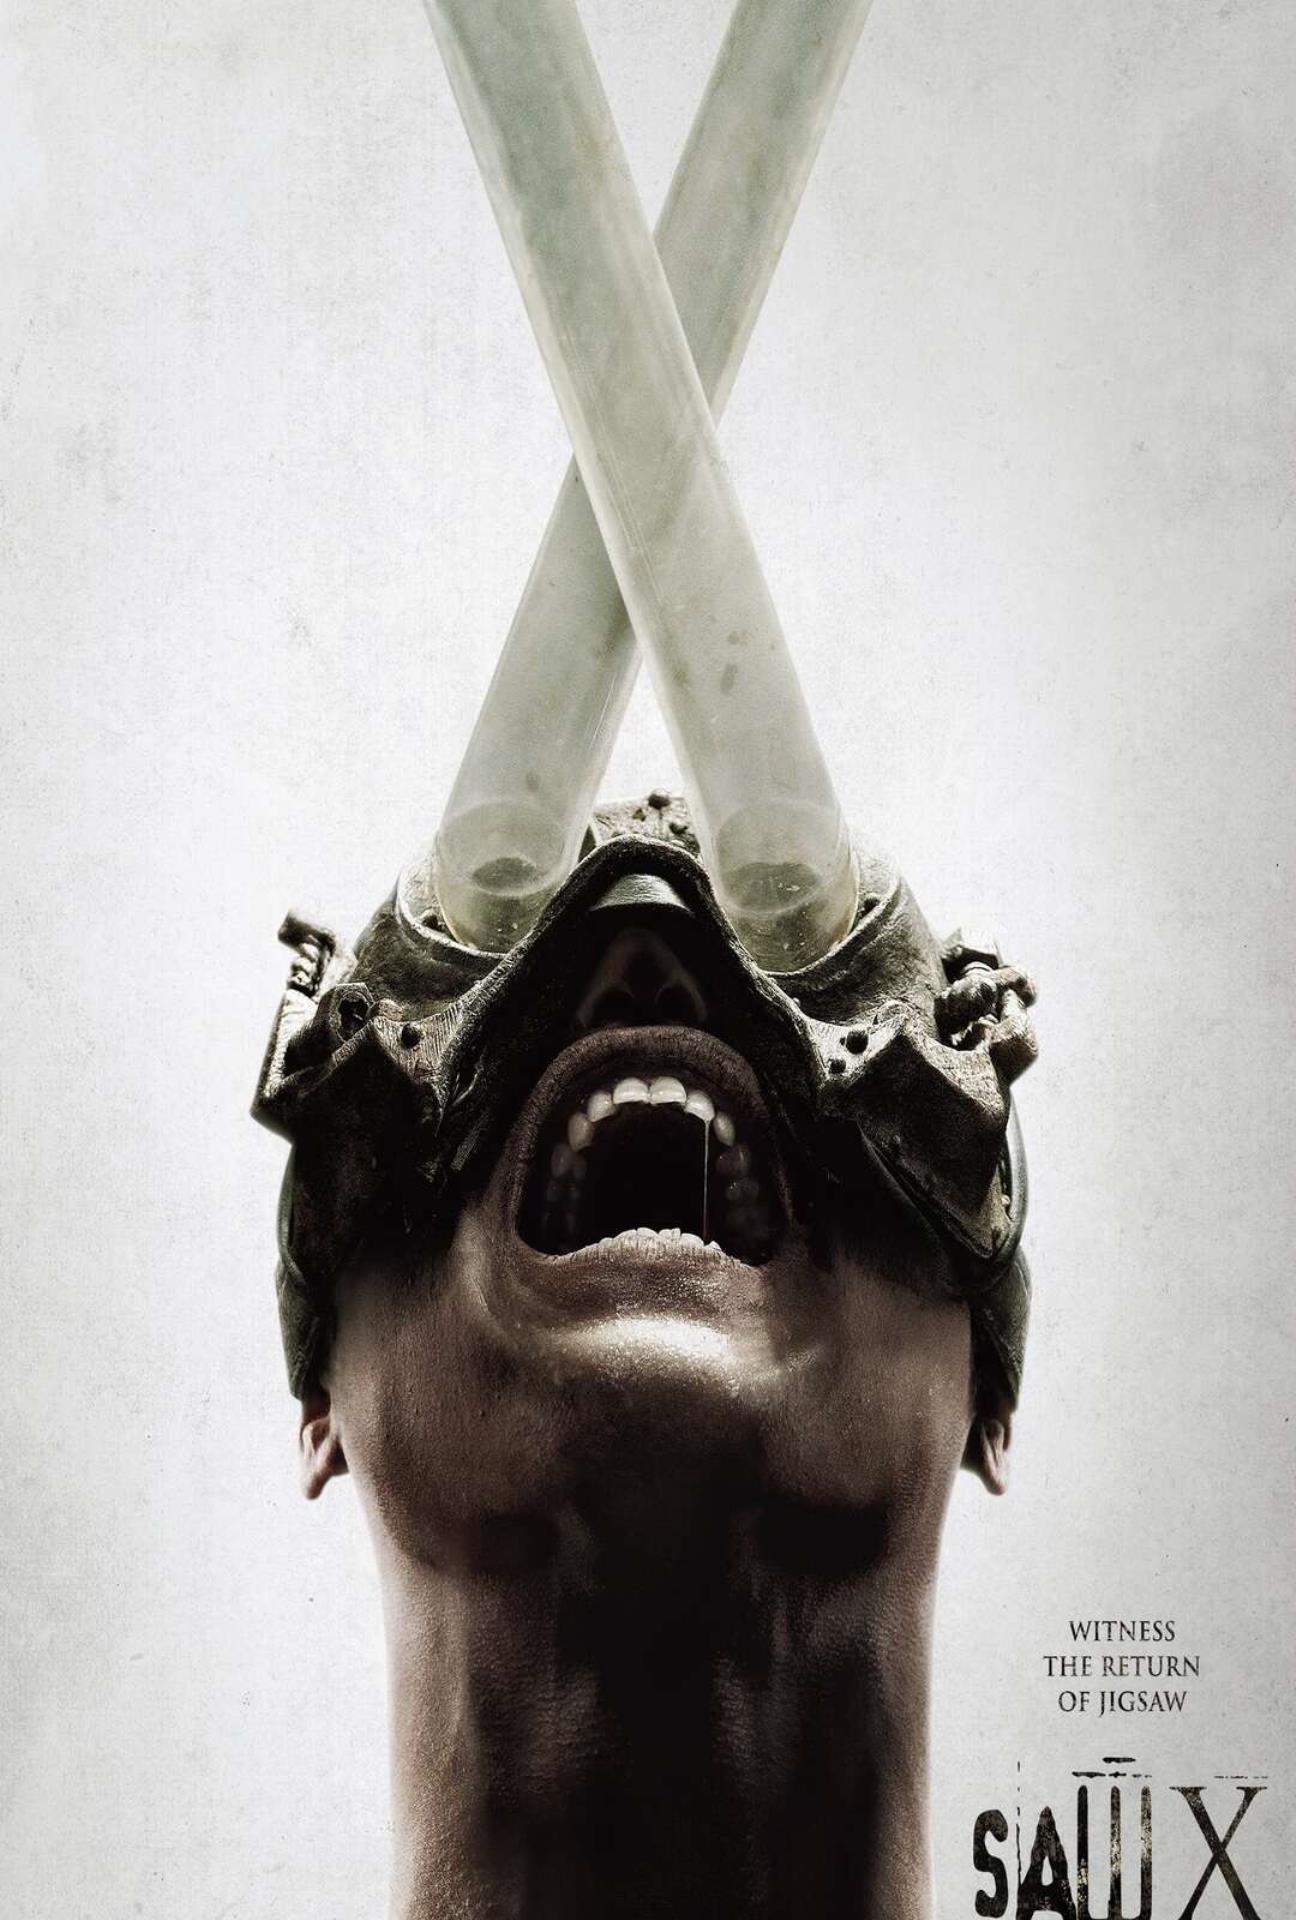 Movie Poster for Saw X